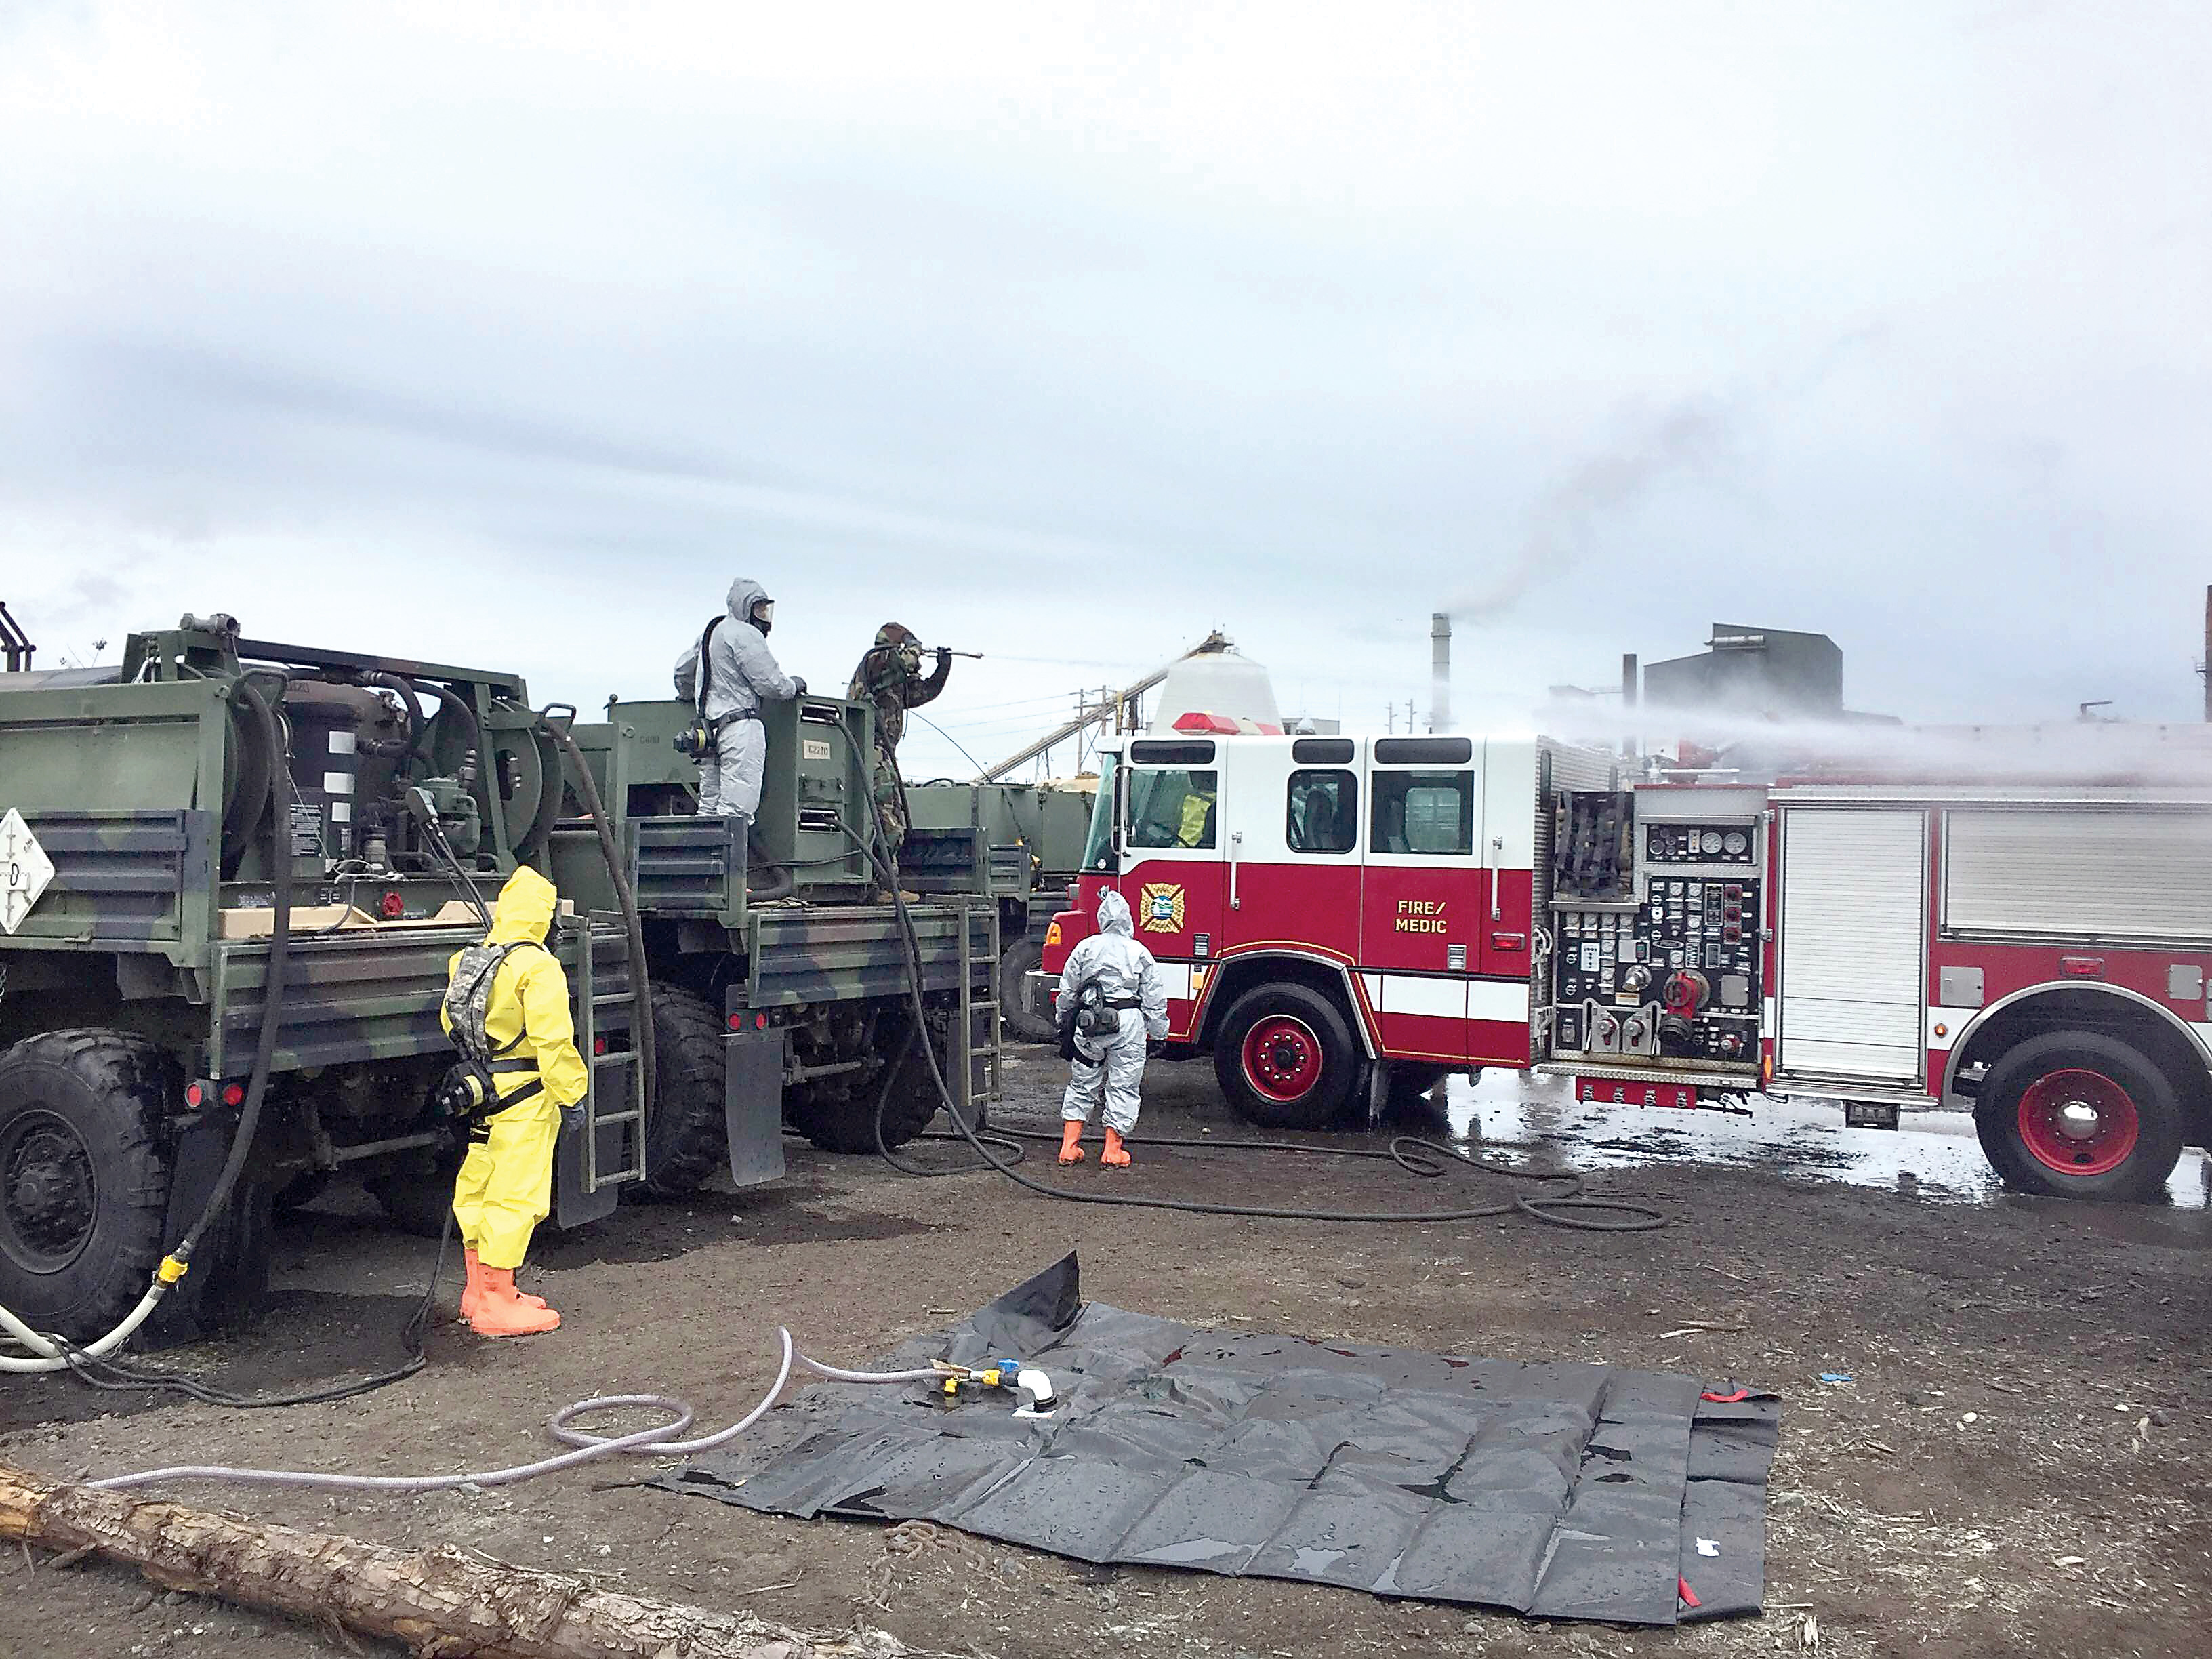 Washington National Guard personnel hose down a fire truck that could be contaminated with various wastes in the event of a tsunami during the Cascadia Rising drill. (Washington National Guard)